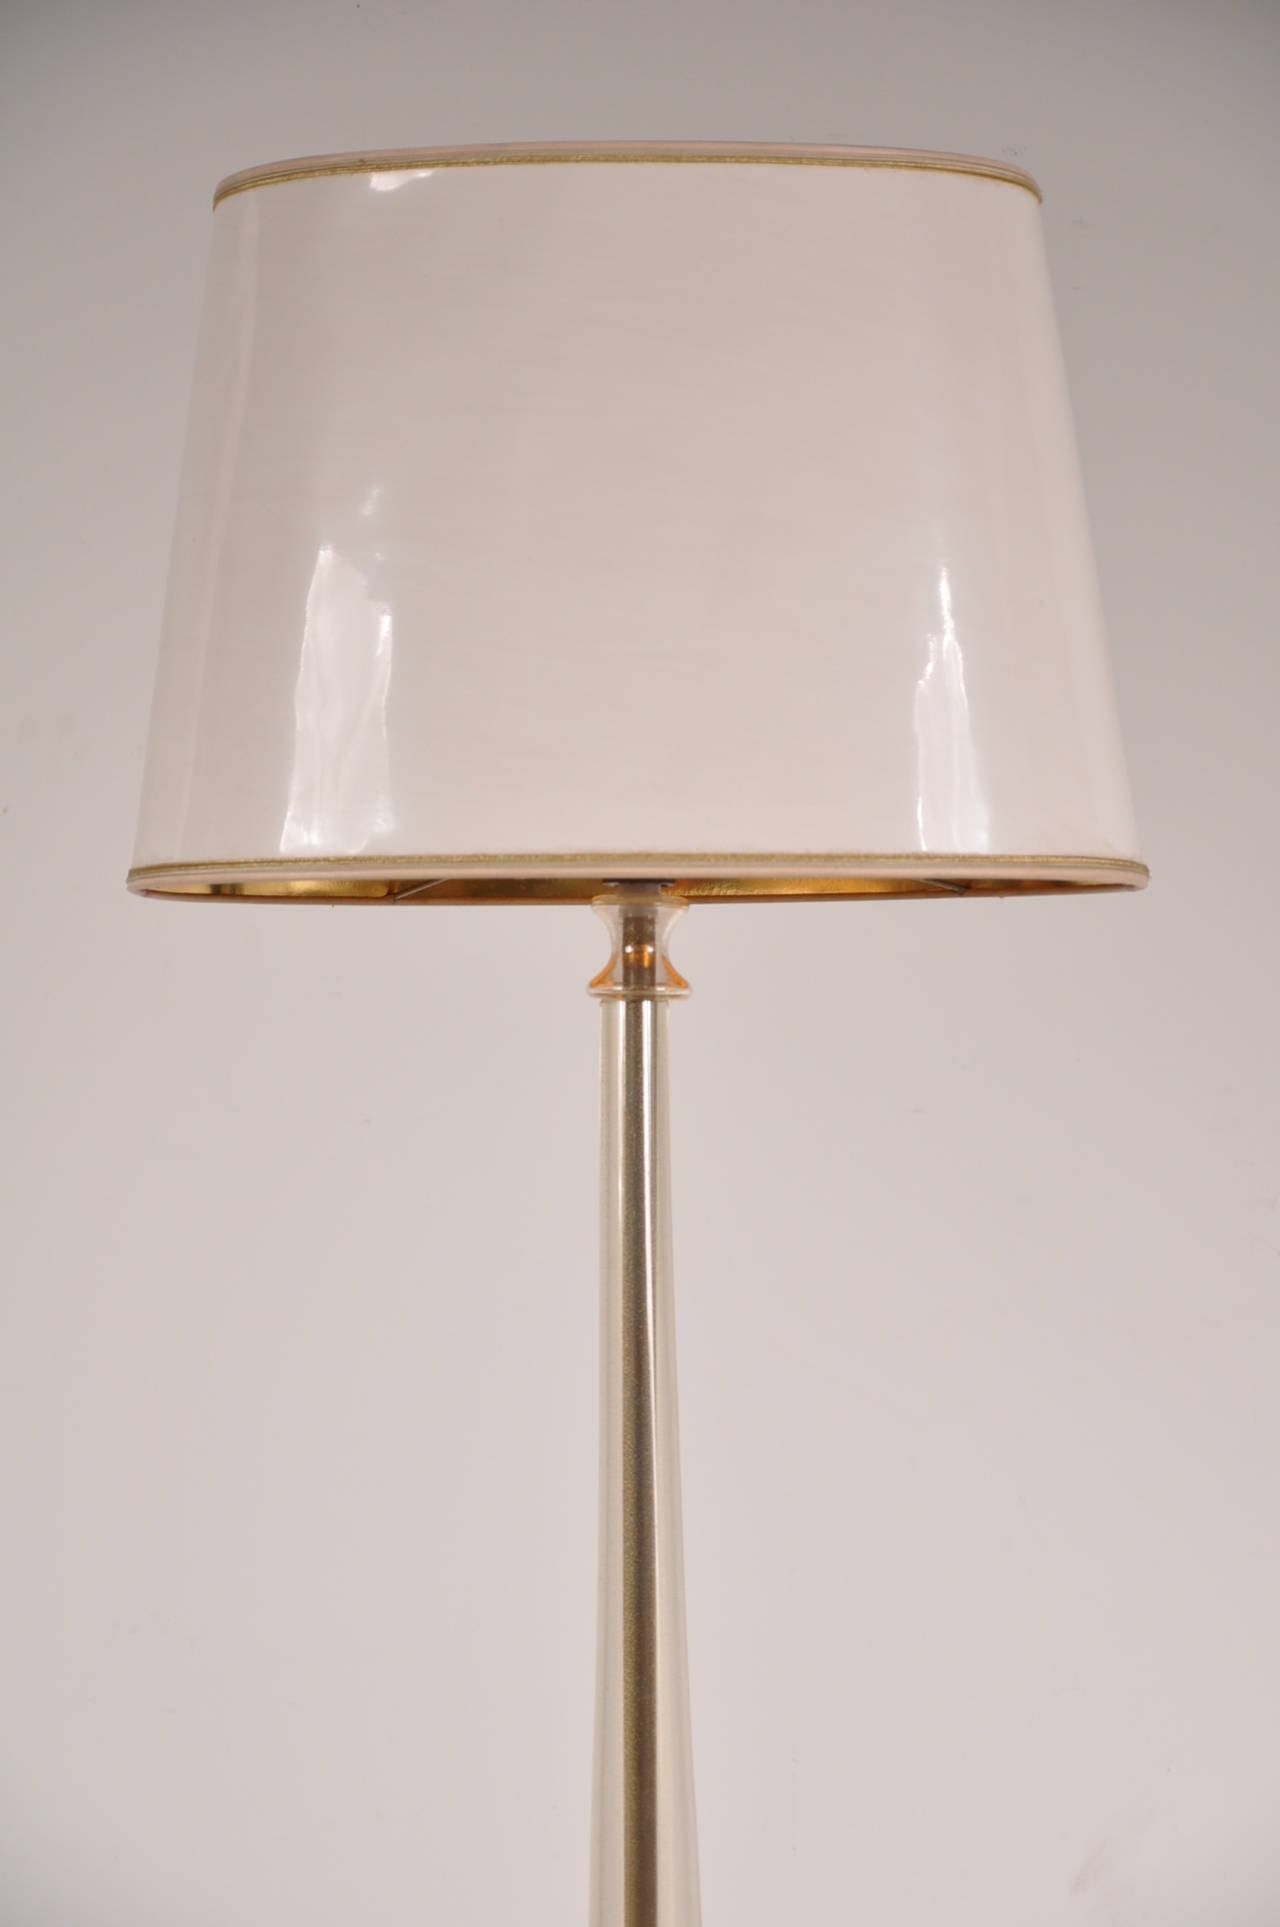 Stunning Murano glass floor lamp in the manner of Barovier e Toso, manufactured in Italy around 1940.

It has a uniquely constructed brass base covered in Murano glass, giving this lamp it's elegant appearance. It has a lacquered hood with gold